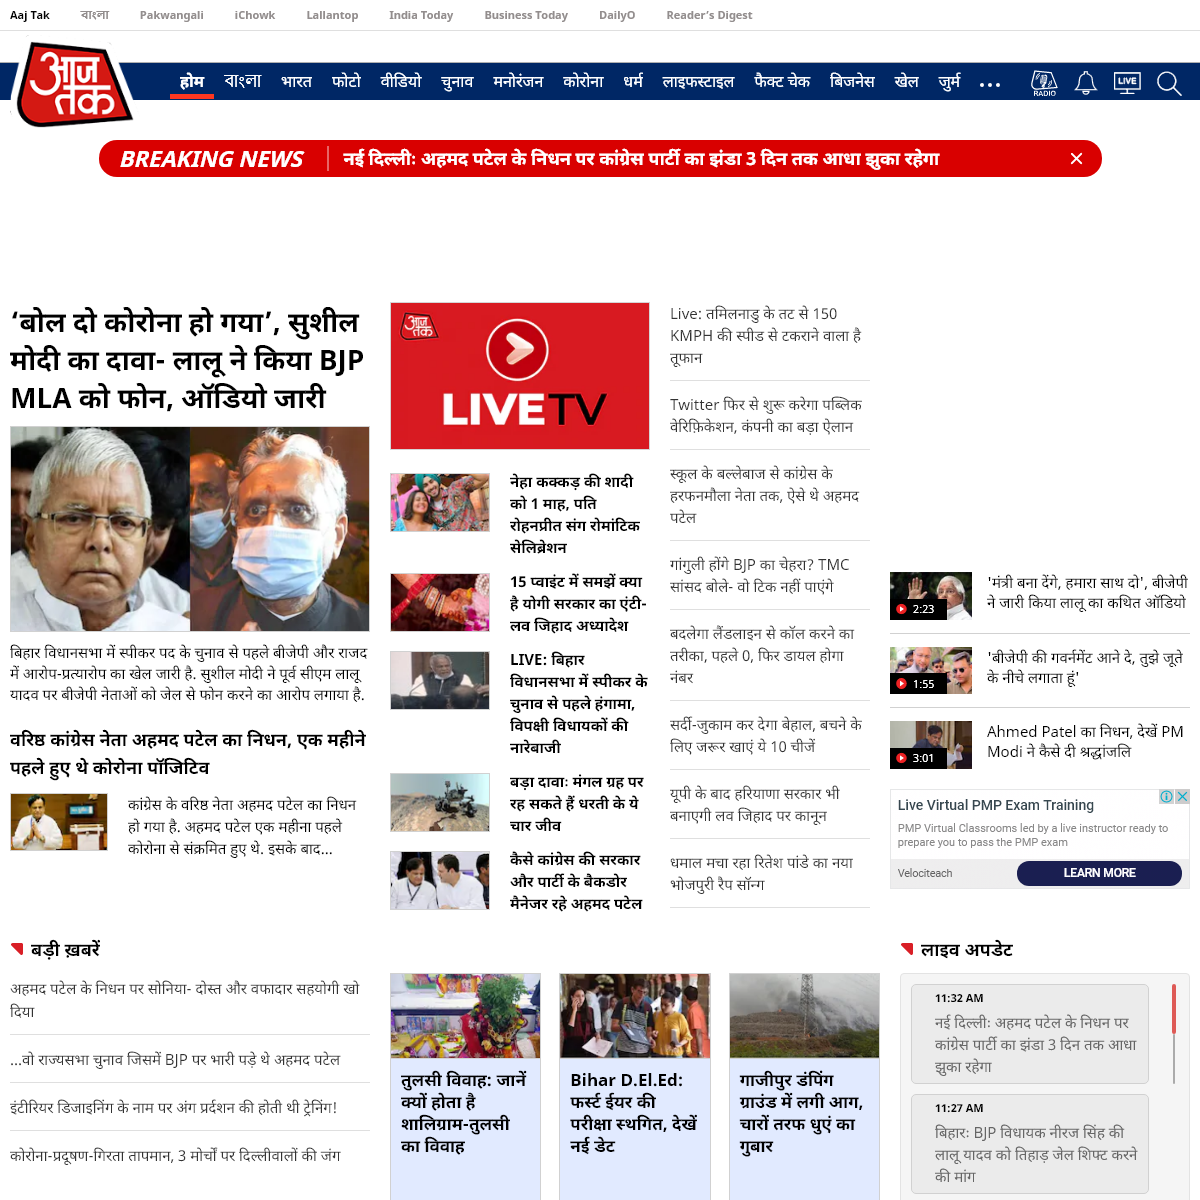 A complete backup of aajtak.intoday.in